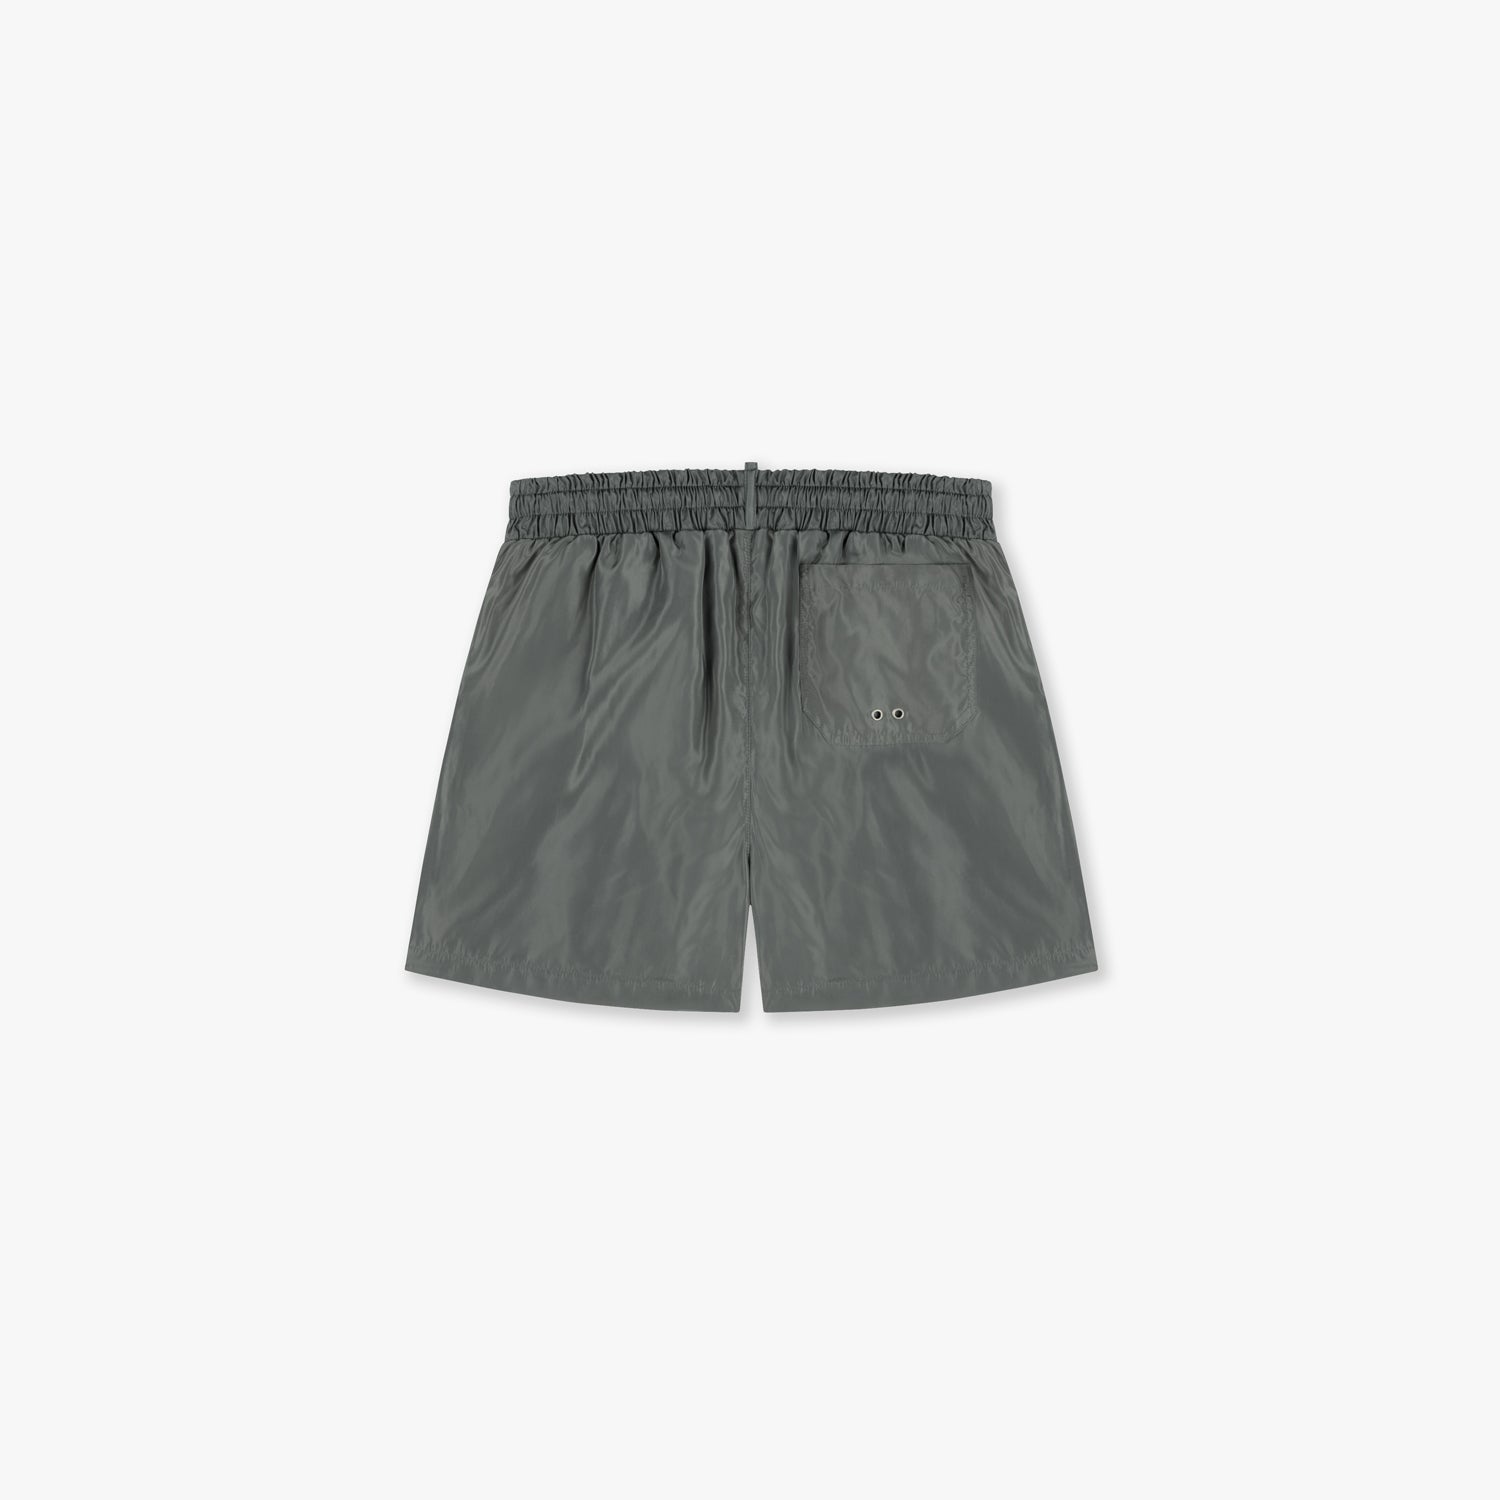 CROYEZ FRATERNITÉ VICE SWIMSHORT - ANTRA/OFF-WHITE